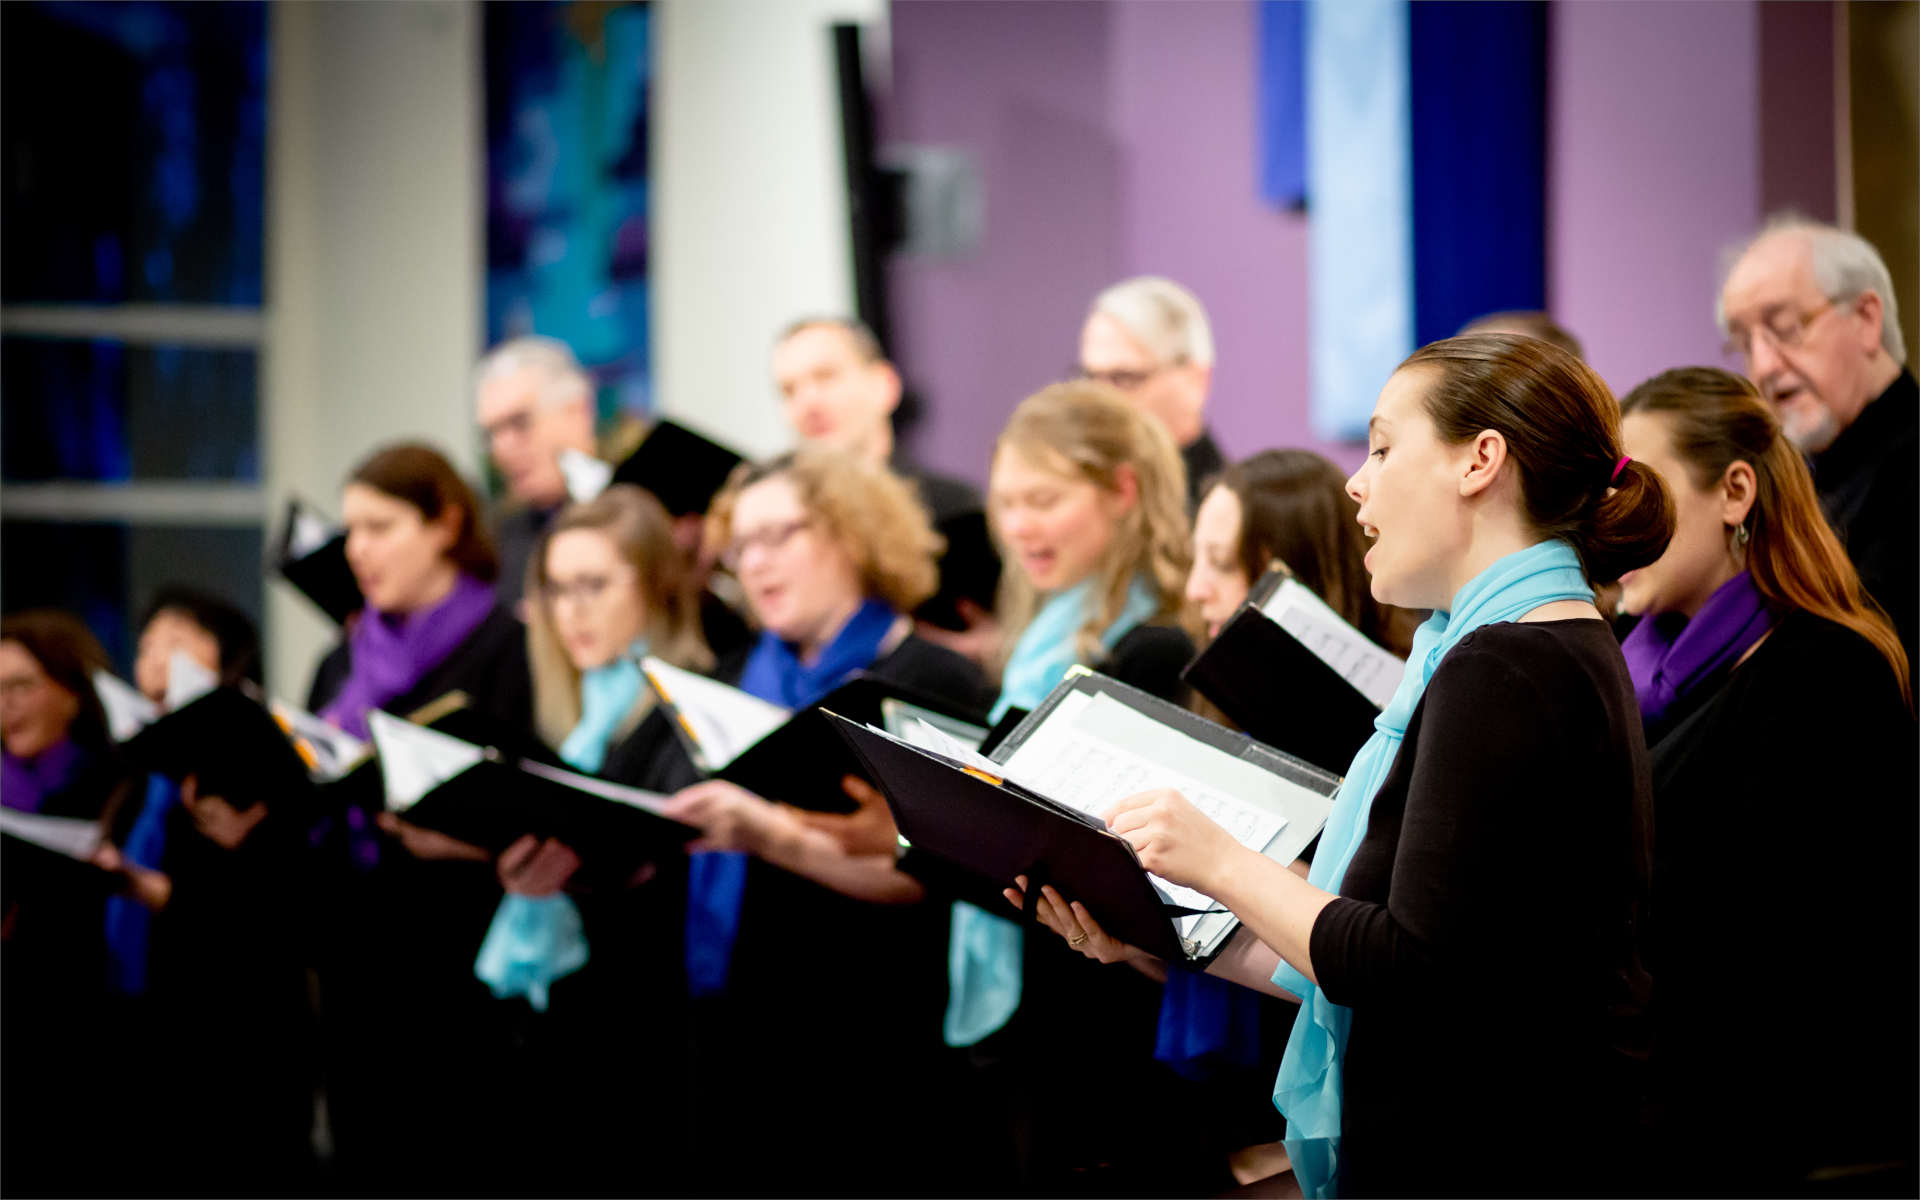 Chorists singing in concert